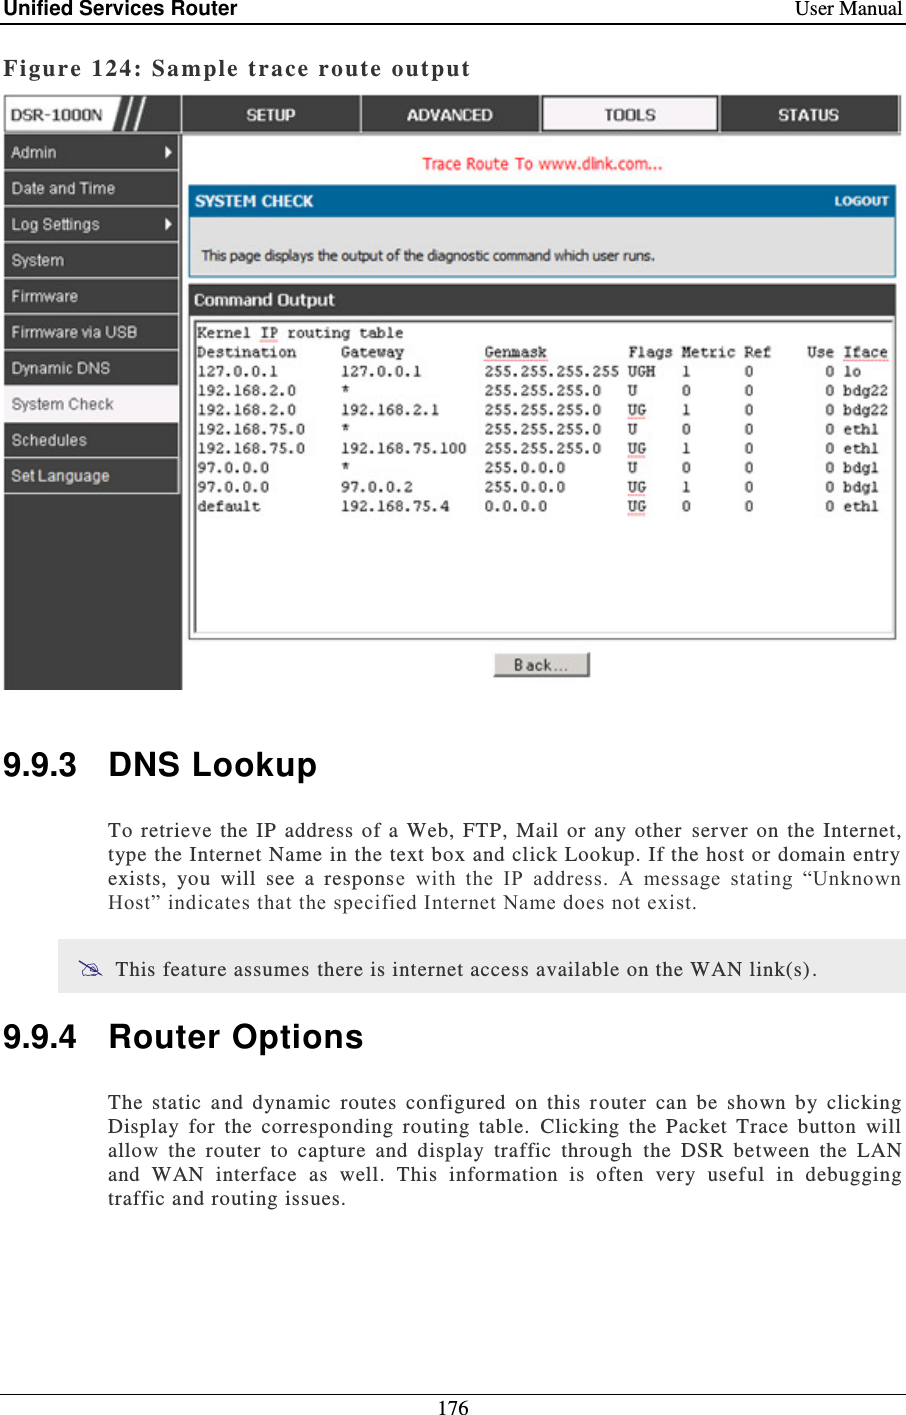 Unified Services Router    User Manual 176  Figure 124: Sample trace route output    9.9.3  DNS Lookup To  retrieve  the  IP  address  of  a Web, FTP, Mail  or  any  other  server  on  the  Internet, type the Internet Name in the text box and click Lookup. If the host or domain entry exists,  you  will  see  a  response  with  the  IP  address.  A  message  stating  “Unknown Host” indicates that the specified Internet Name does not exist.   This feature assumes there is internet access available on the WAN link(s). 9.9.4  Router Options The  static  and  dynamic  routes  configured  on  this  r outer  can  be  shown  by  clicking Display  for  the  corresponding  routing  table.  Clicking  the  Packet  Trace  button  will allow  the  router  to  capture  and  display  traffic  through  the  DSR  between  the  LAN and  WAN  interface  as  well.  This  information  is  often  very  useful  in  debugging traffic and routing issues.      